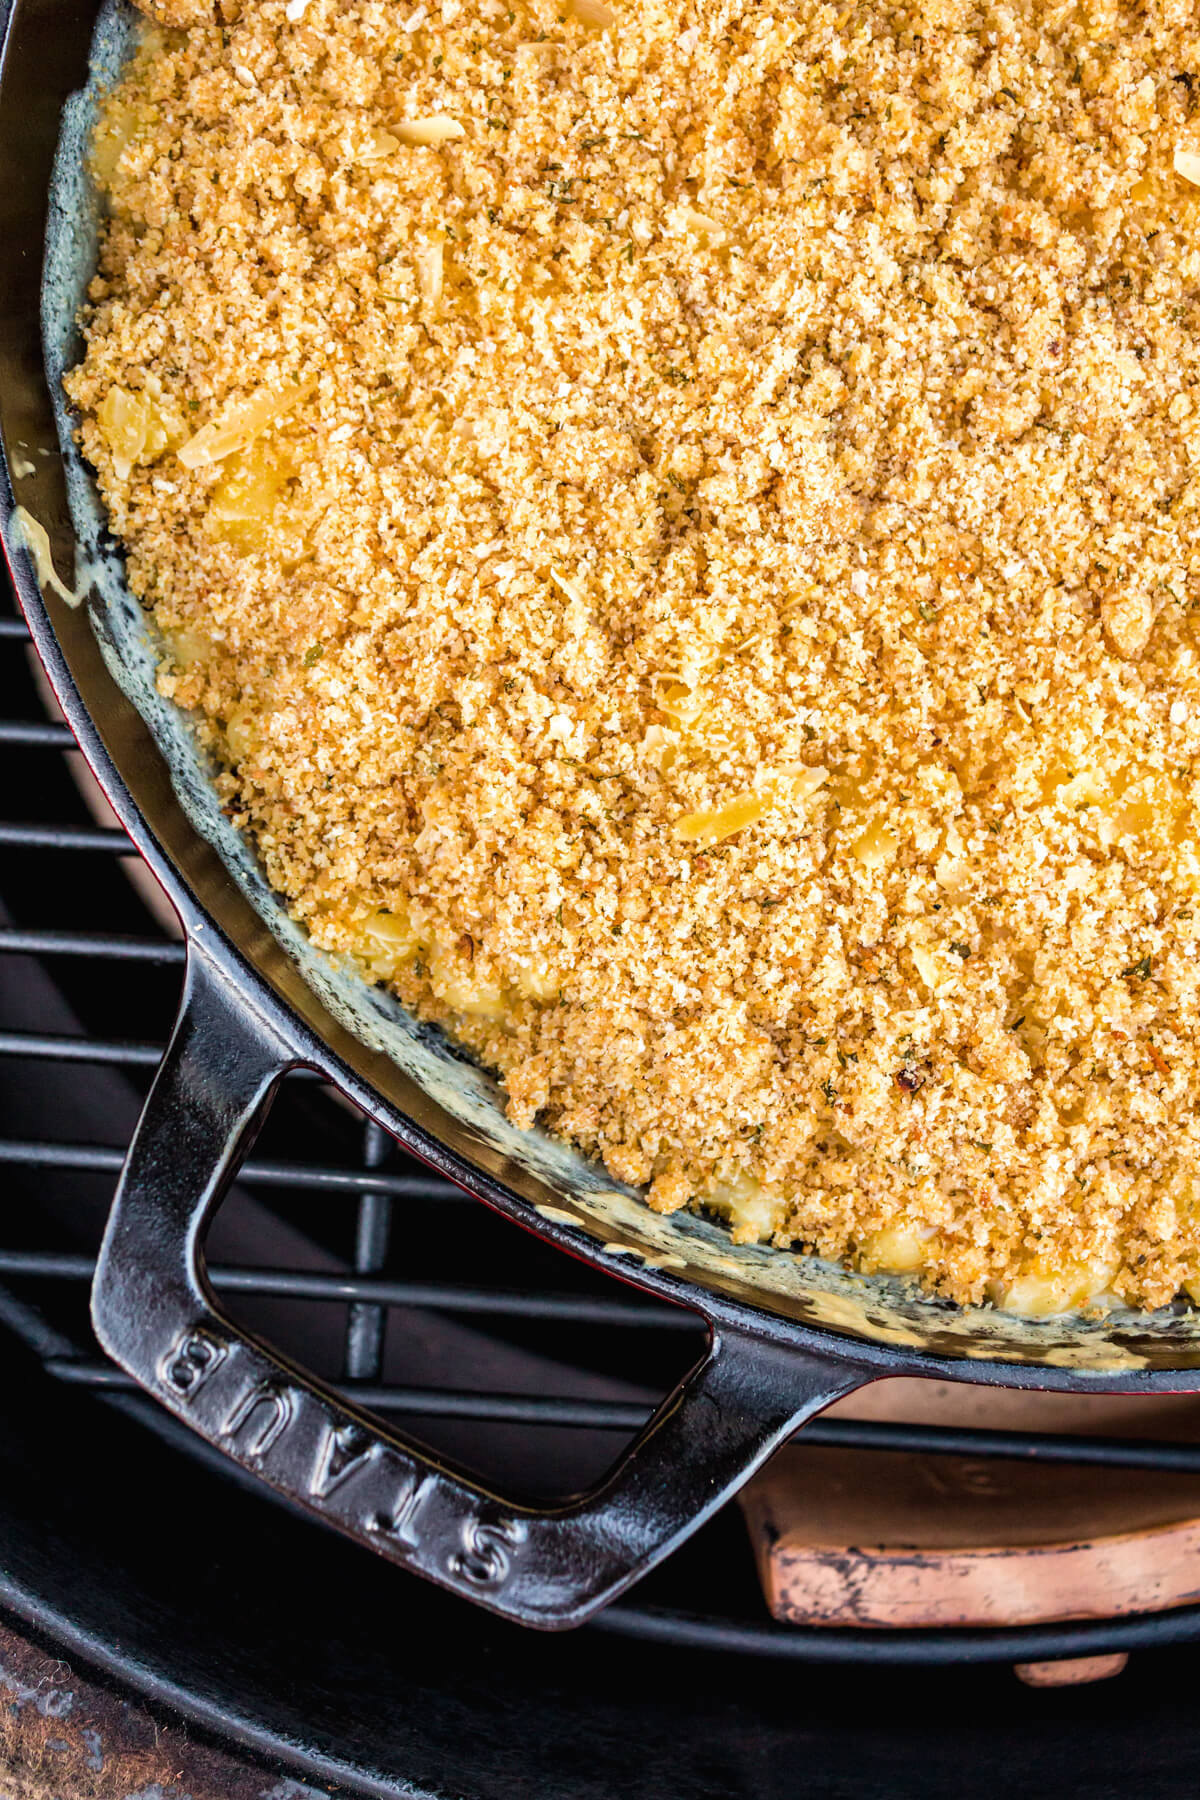 A black cast iron pan full of creamy Smoked Mac and Cheese topped with toasted golden bread crumbs in a smoker.